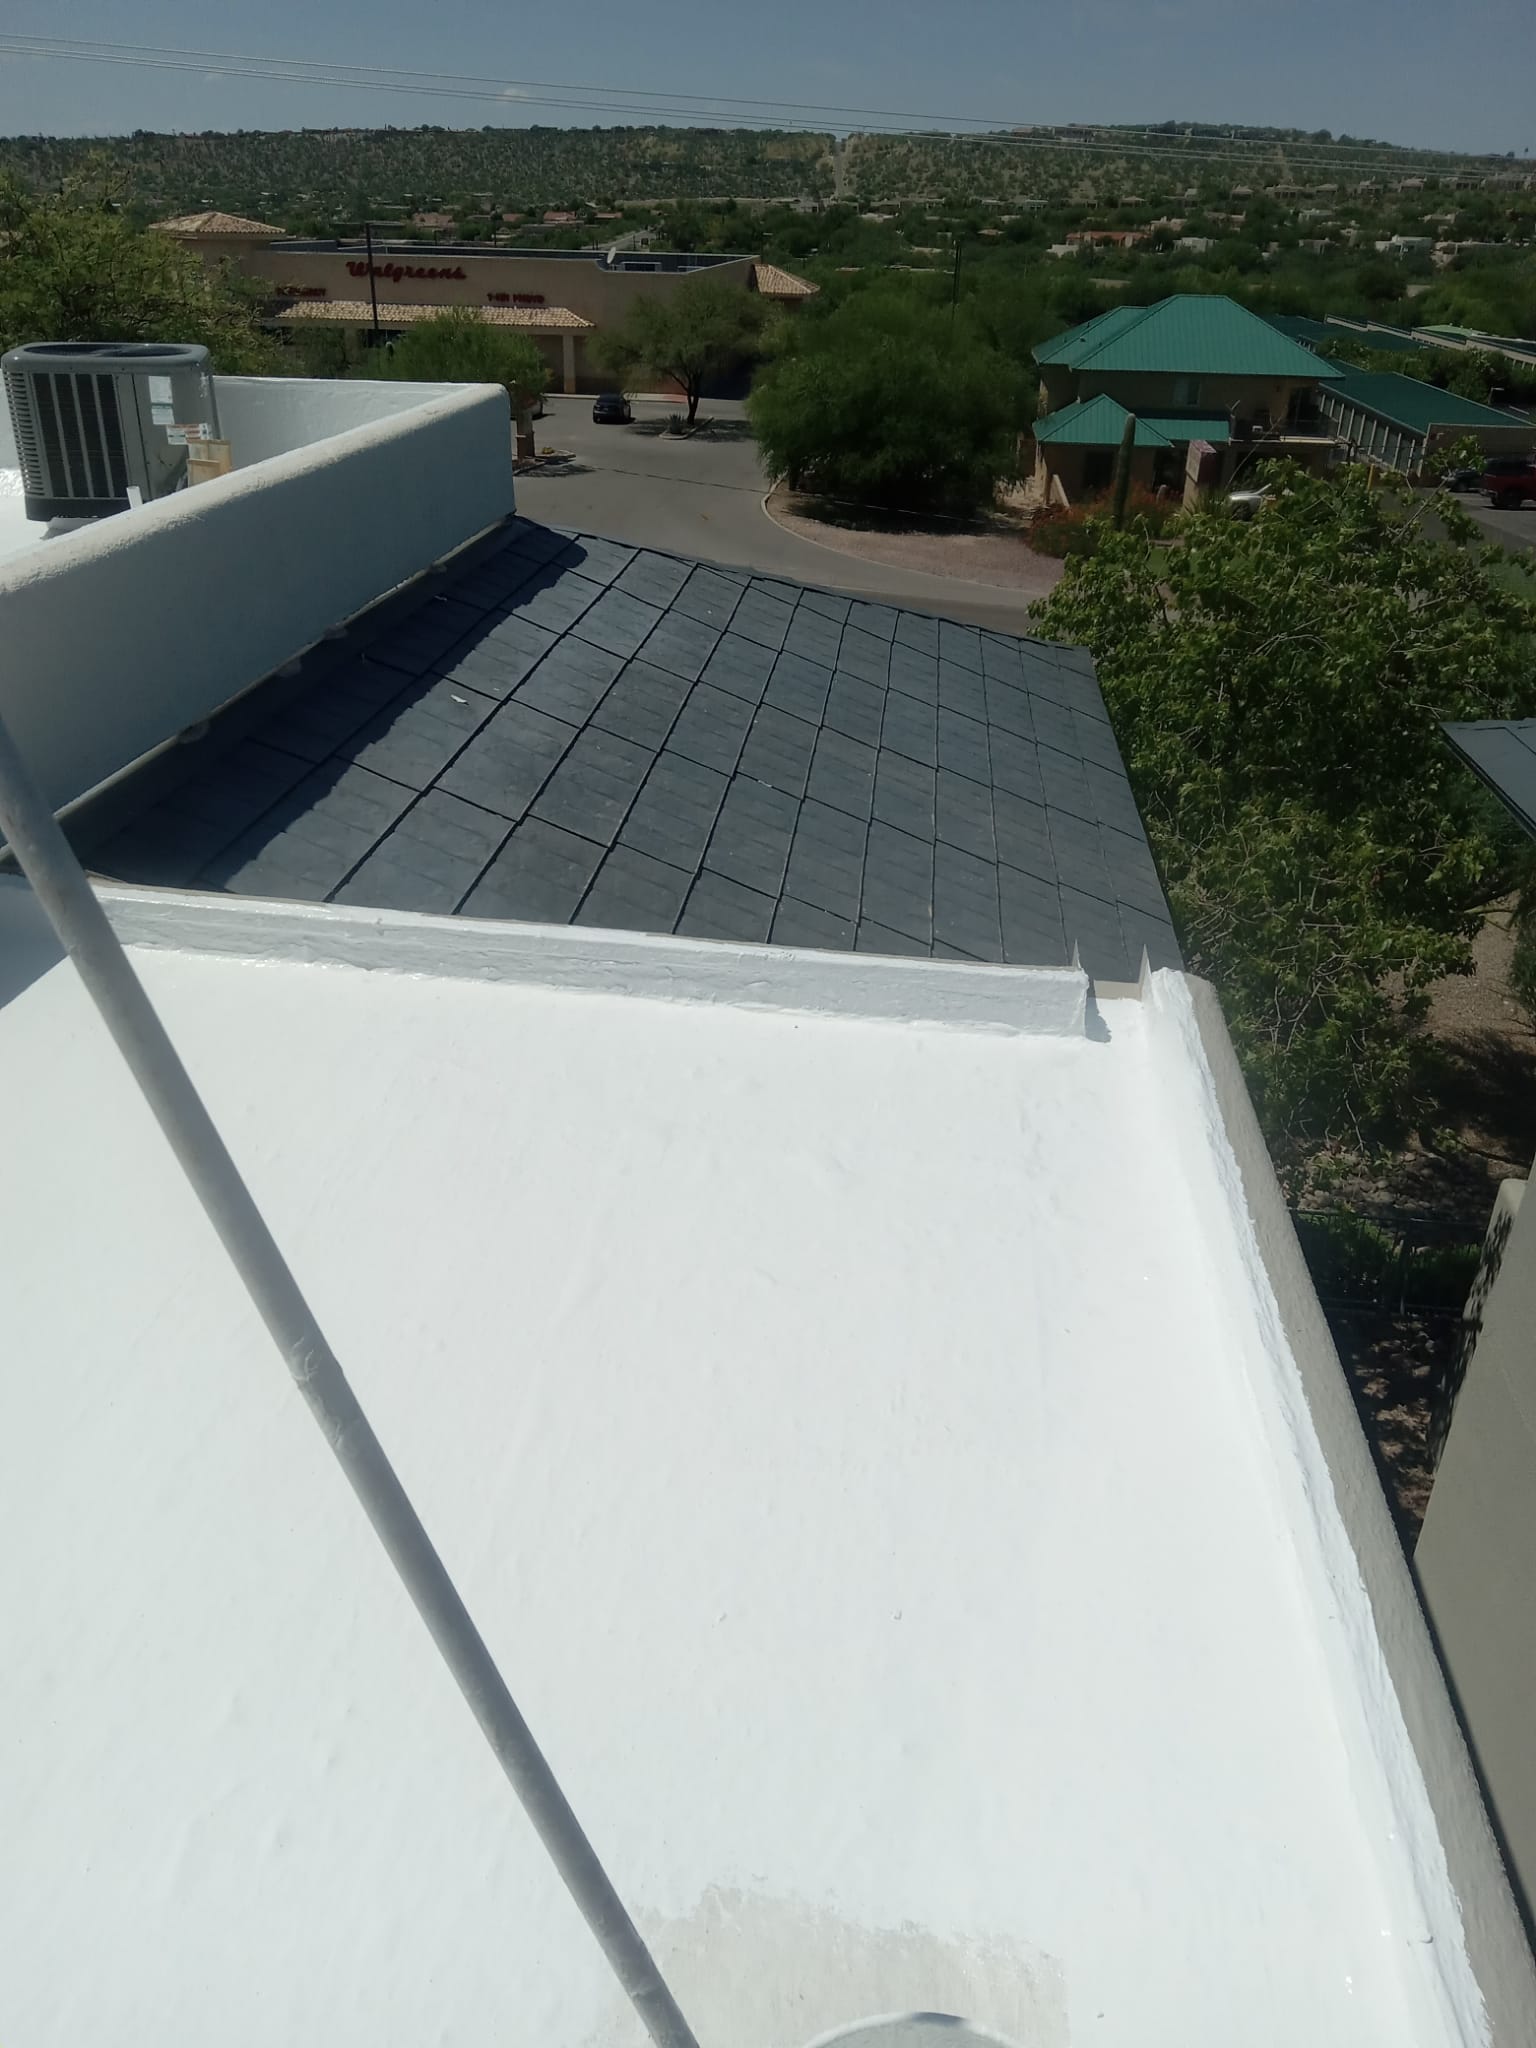 Chandler residence displaying a roof part foam insulated and part tiled.